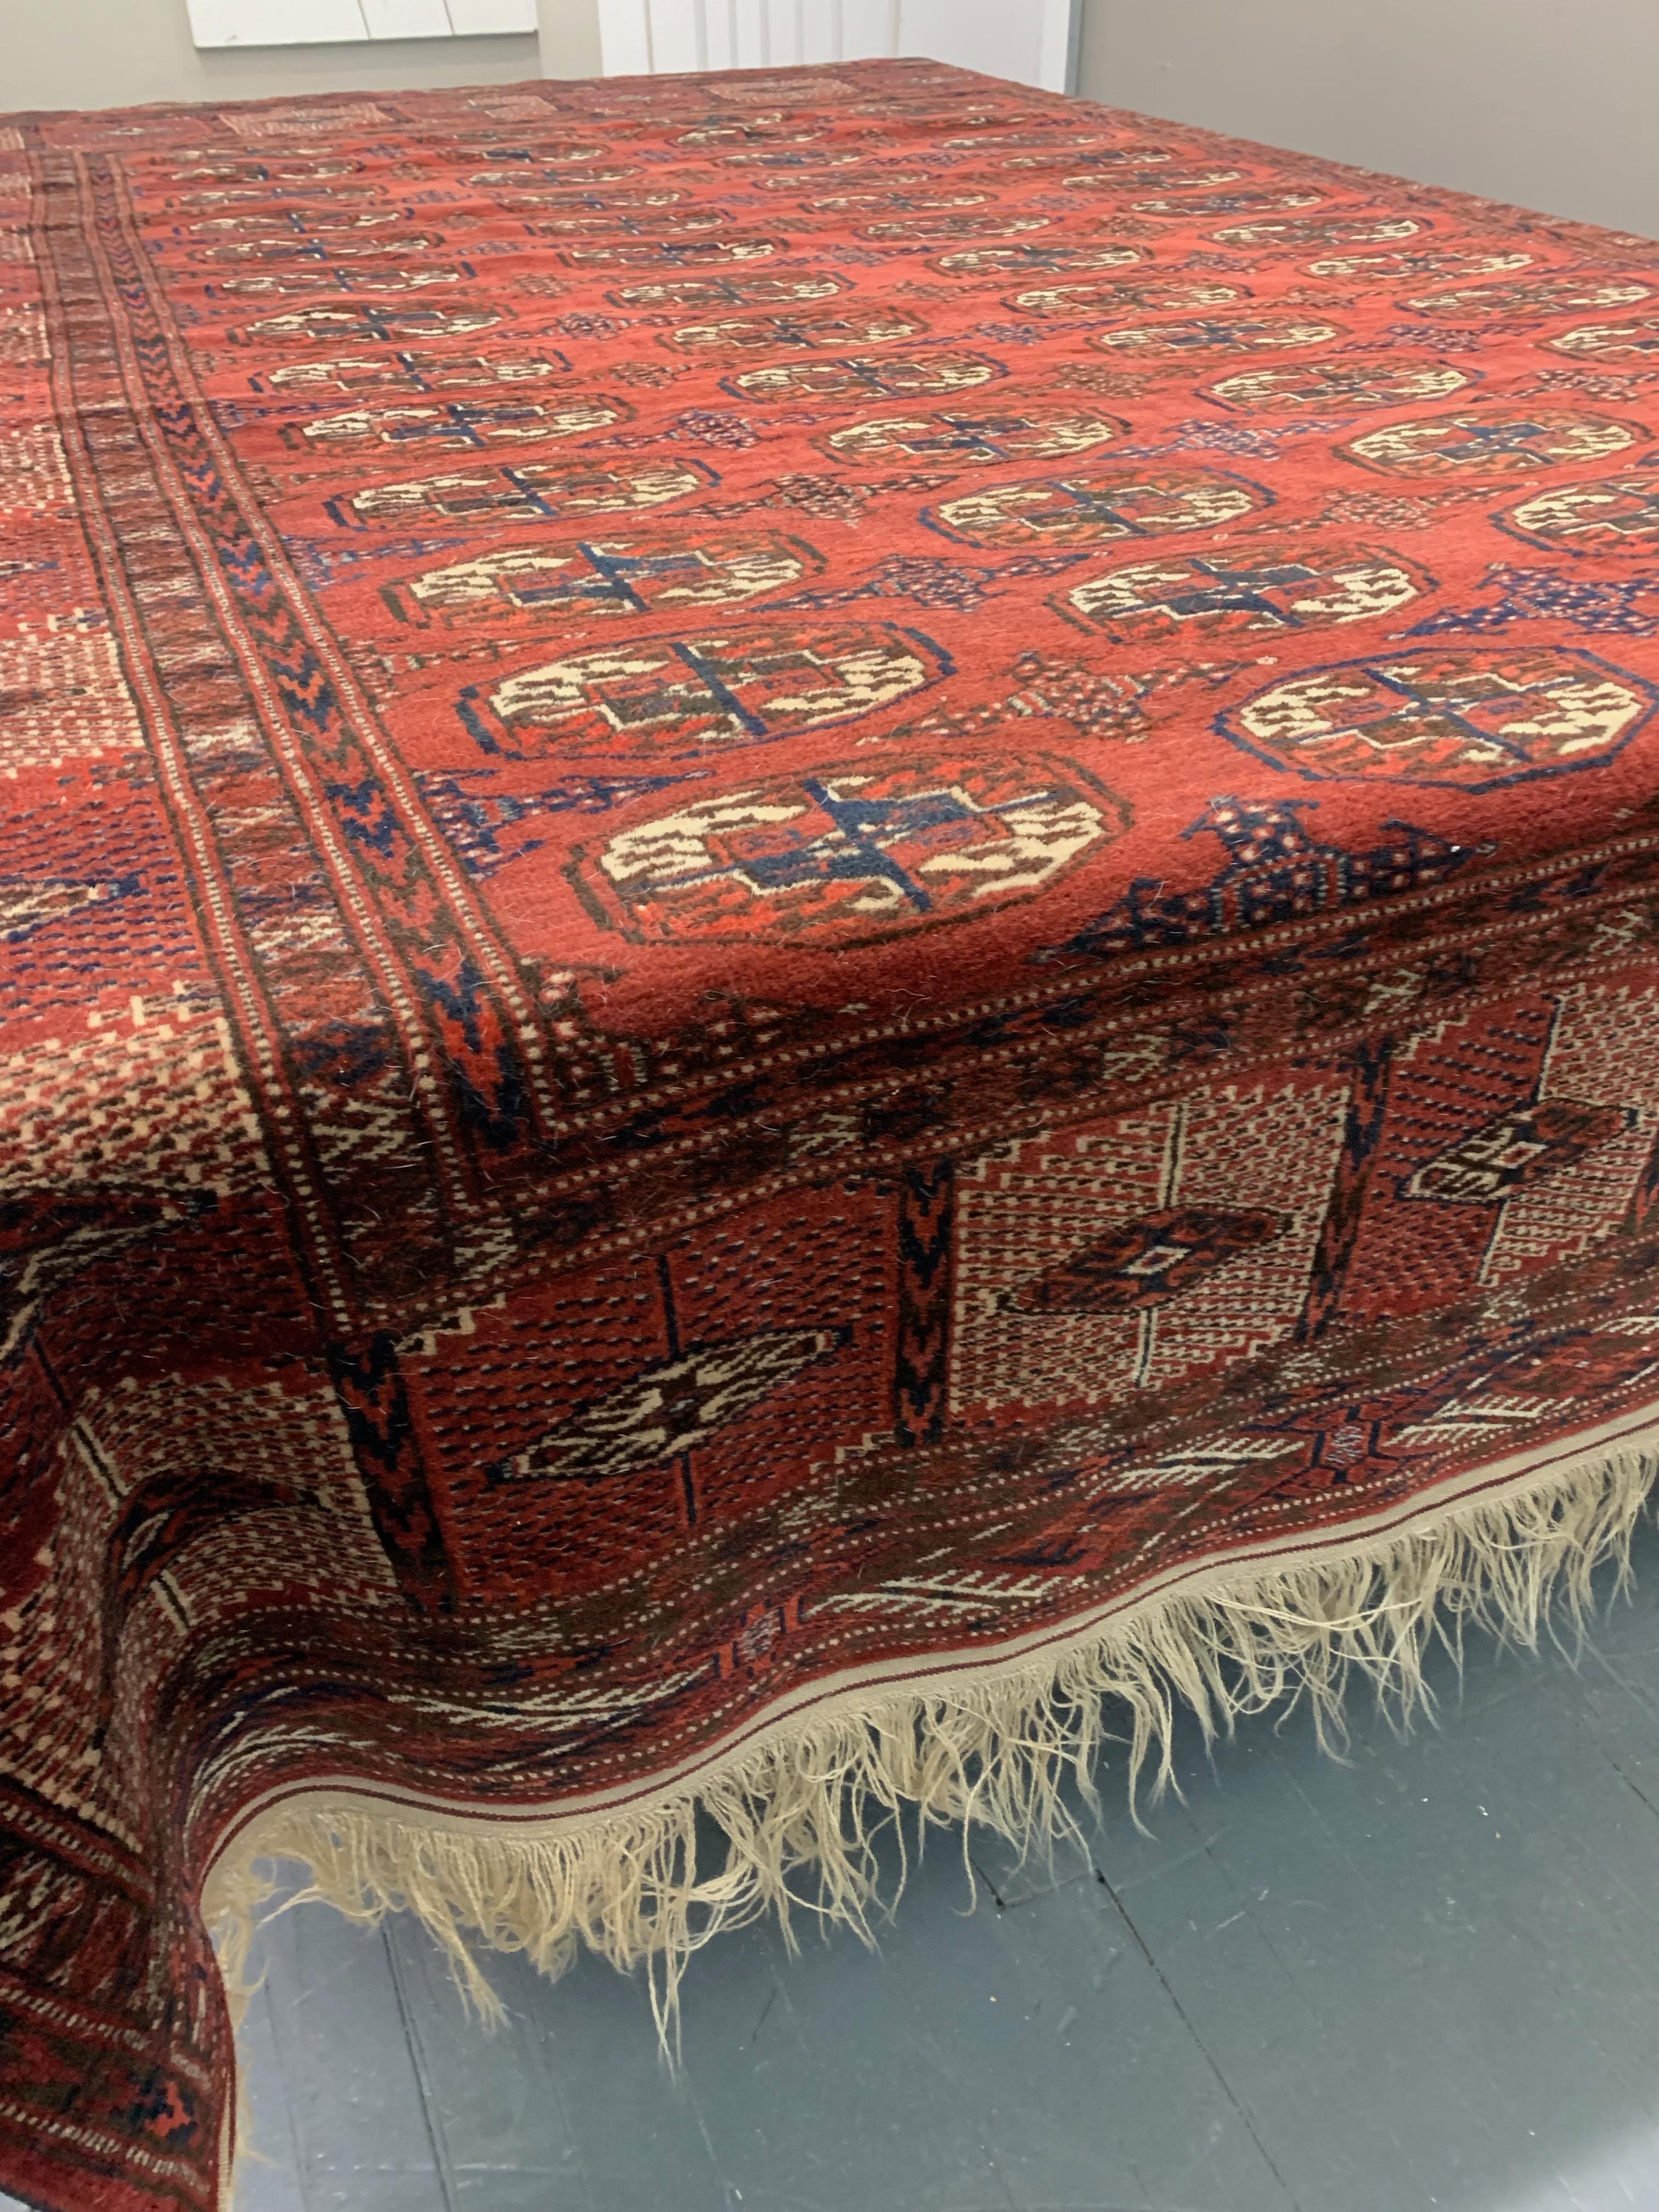 Large Russian Bokhara Rug Original, 19th Century In Good Condition For Sale In Jersey City, NJ